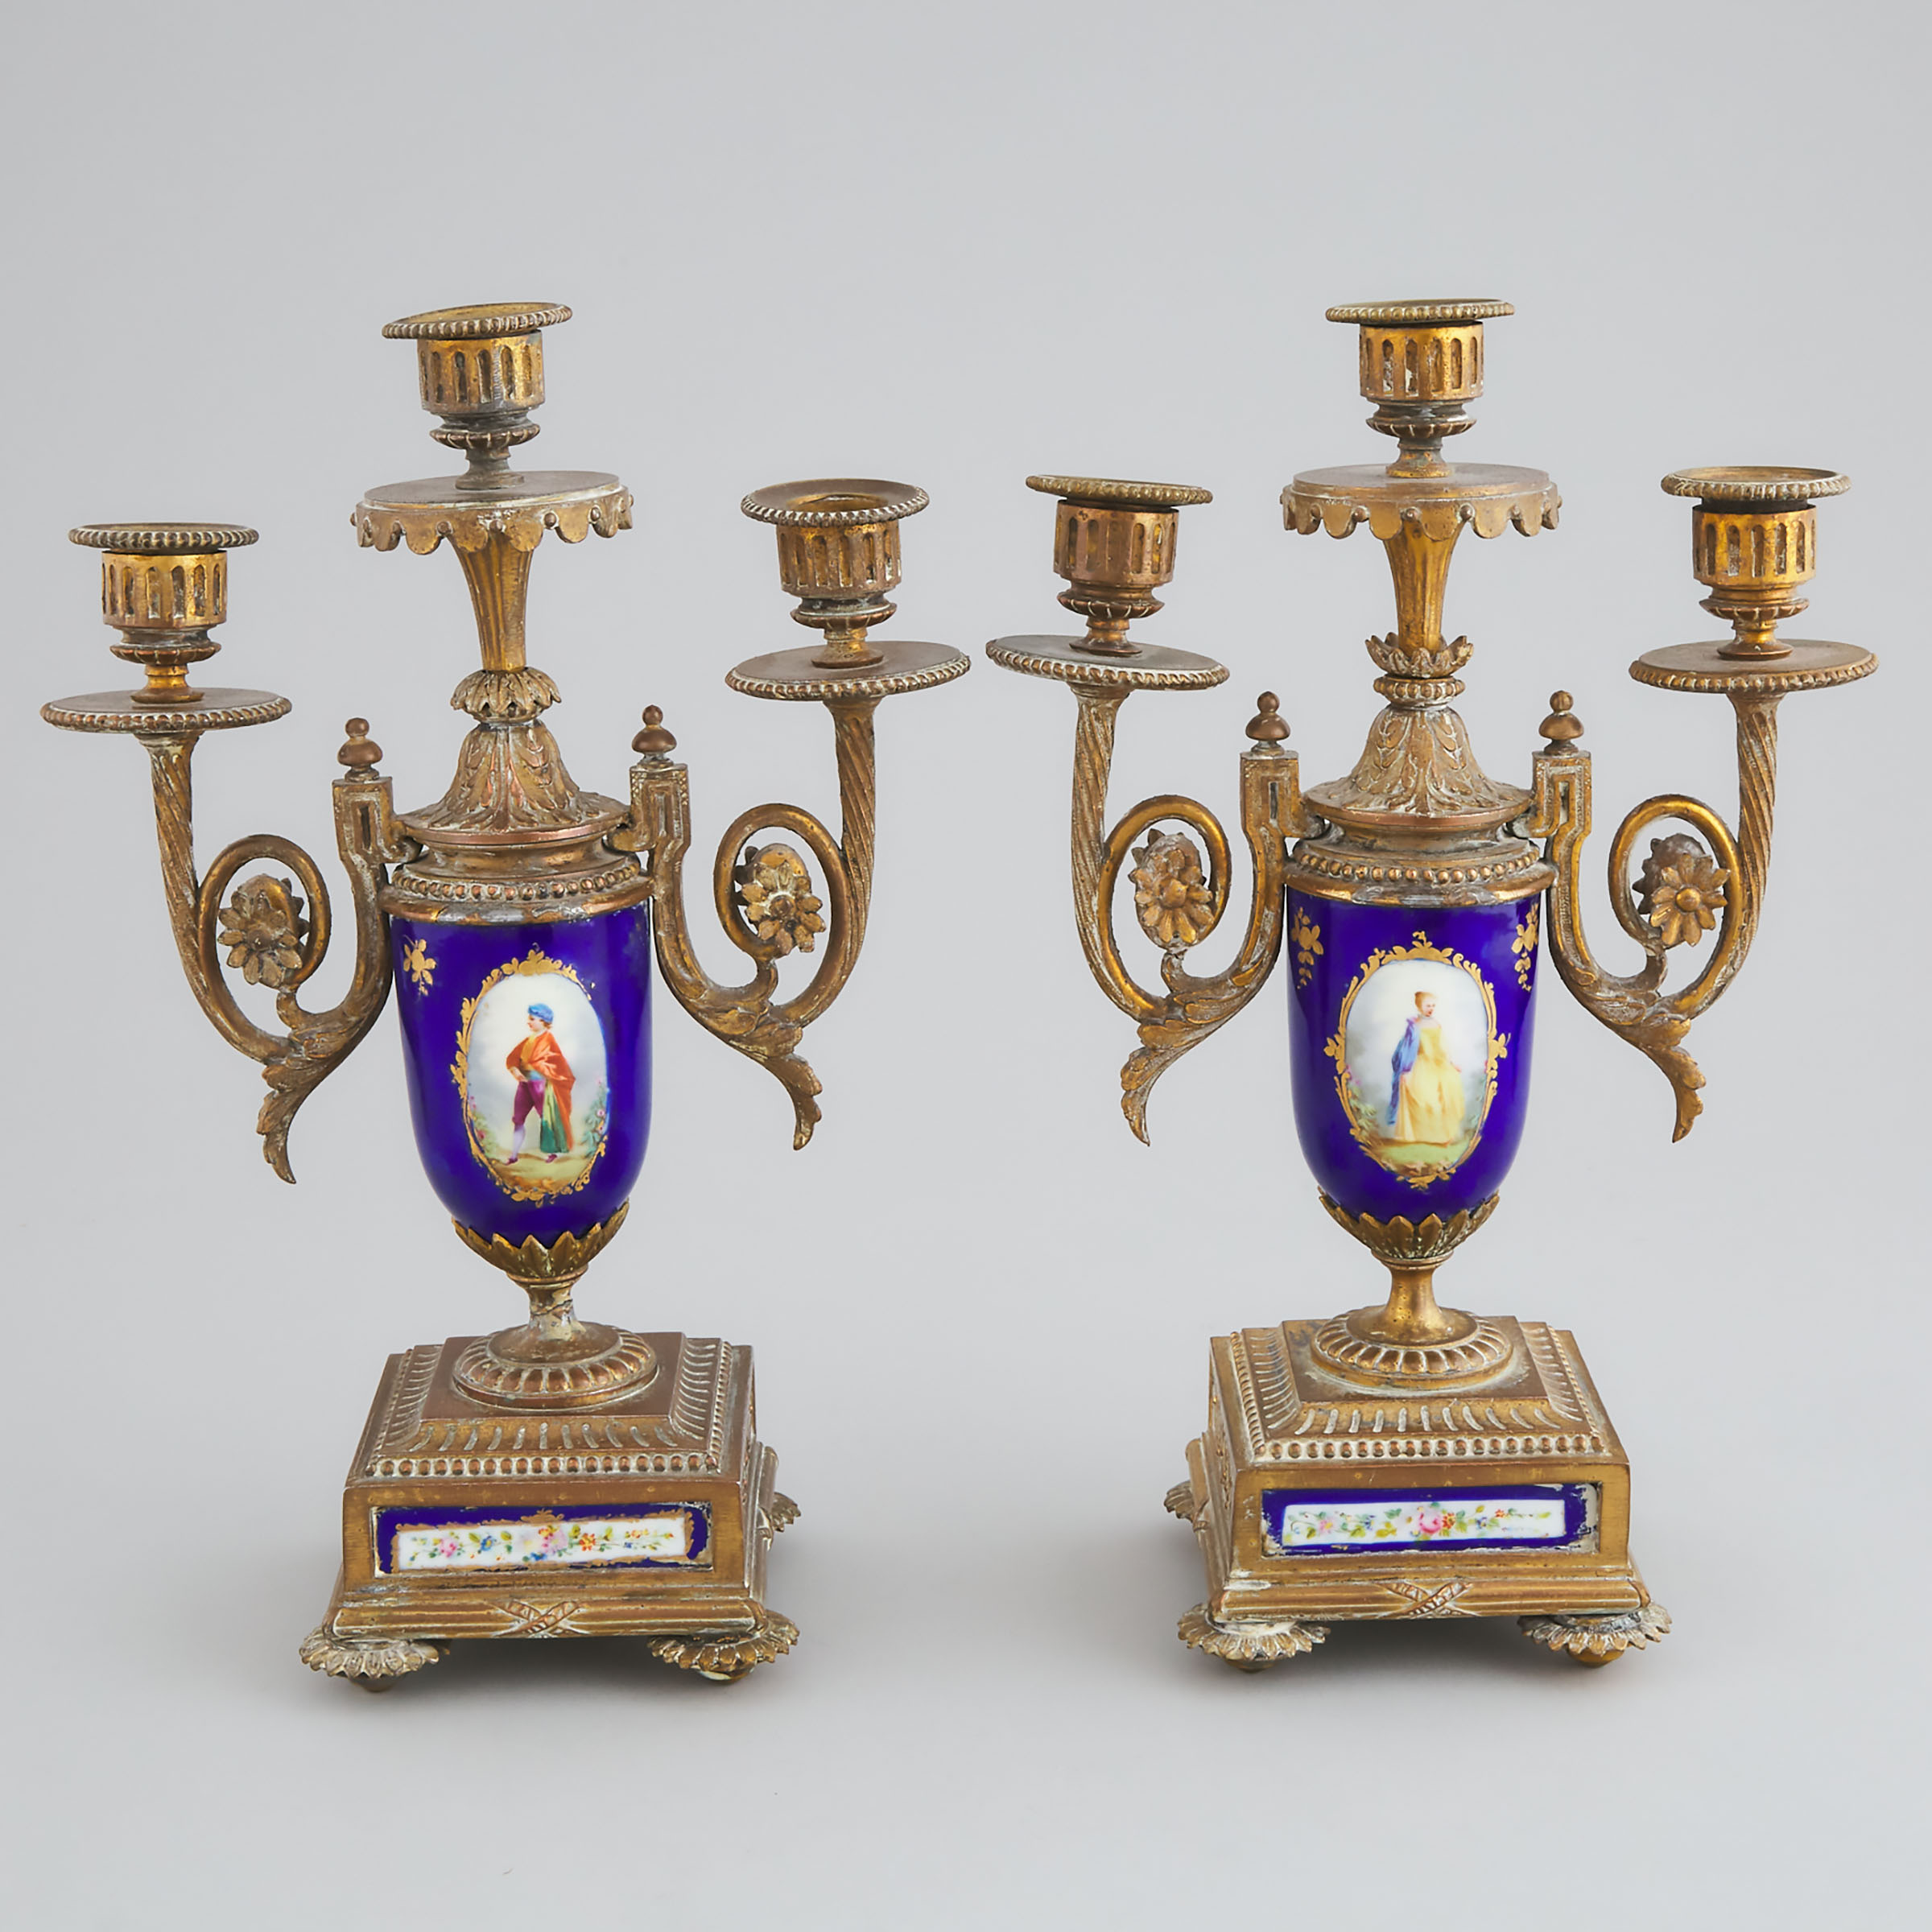 Pair of Louis XVI Style 'Sèvres' Porcelain Mounted Candelabras, late 19th century